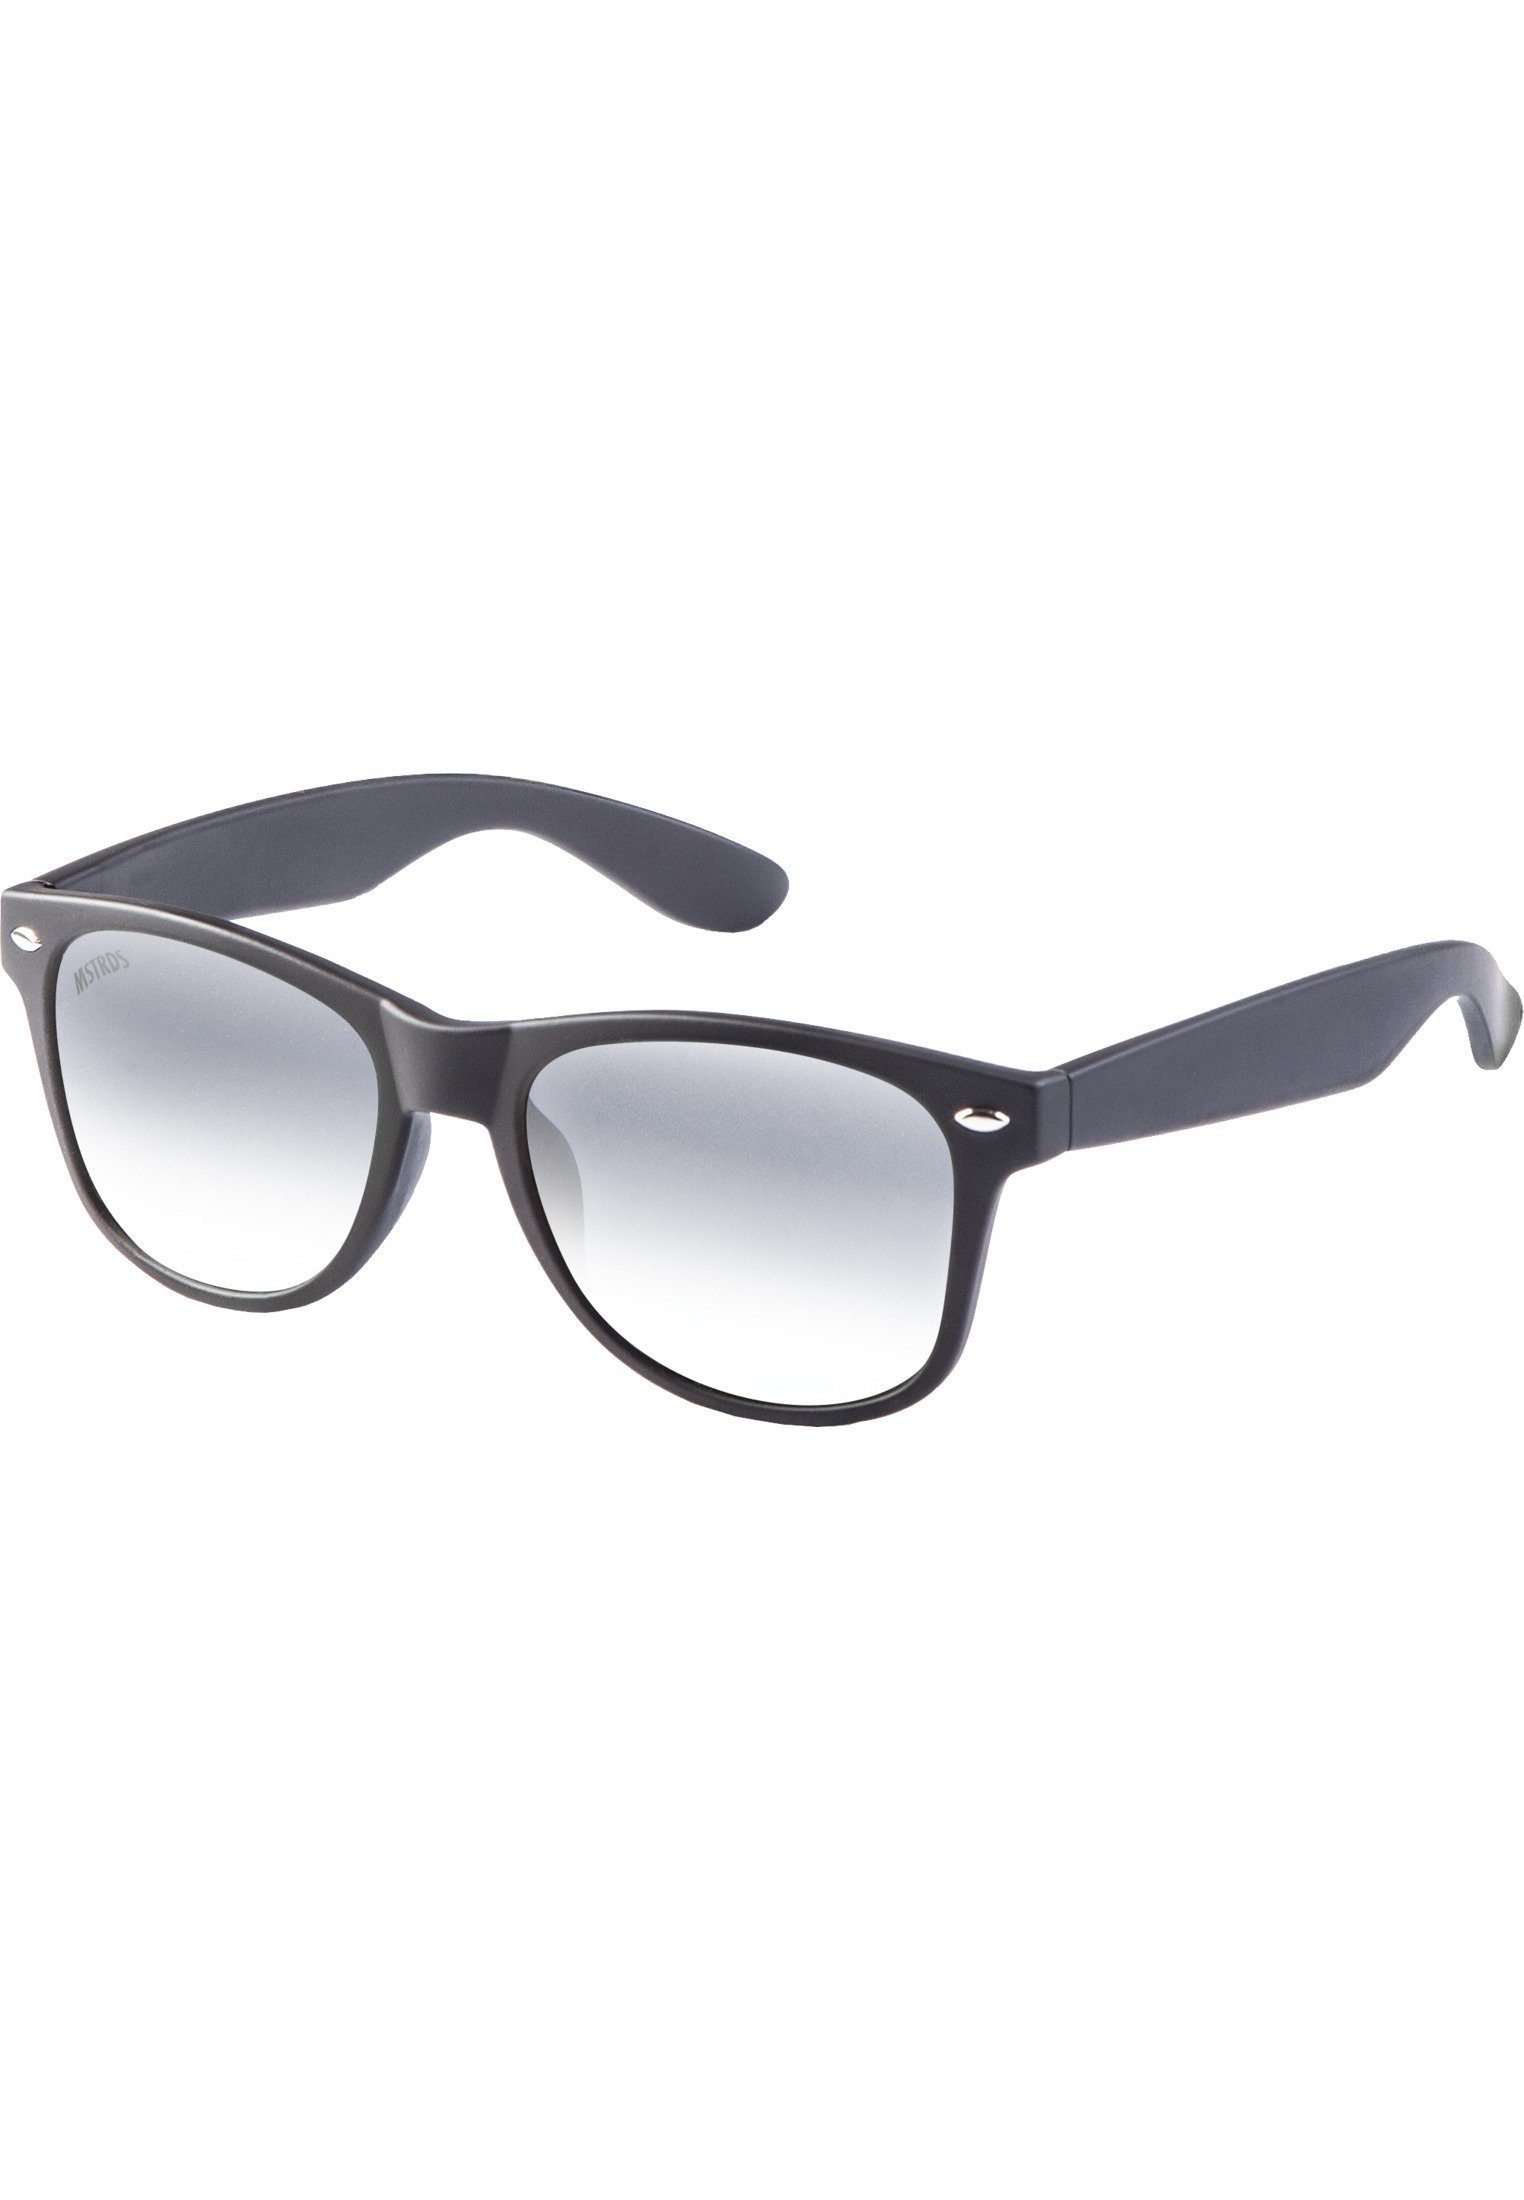 Sonnenbrille MSTRDS Youth Likoma blk/silver Sunglasses Accessoires